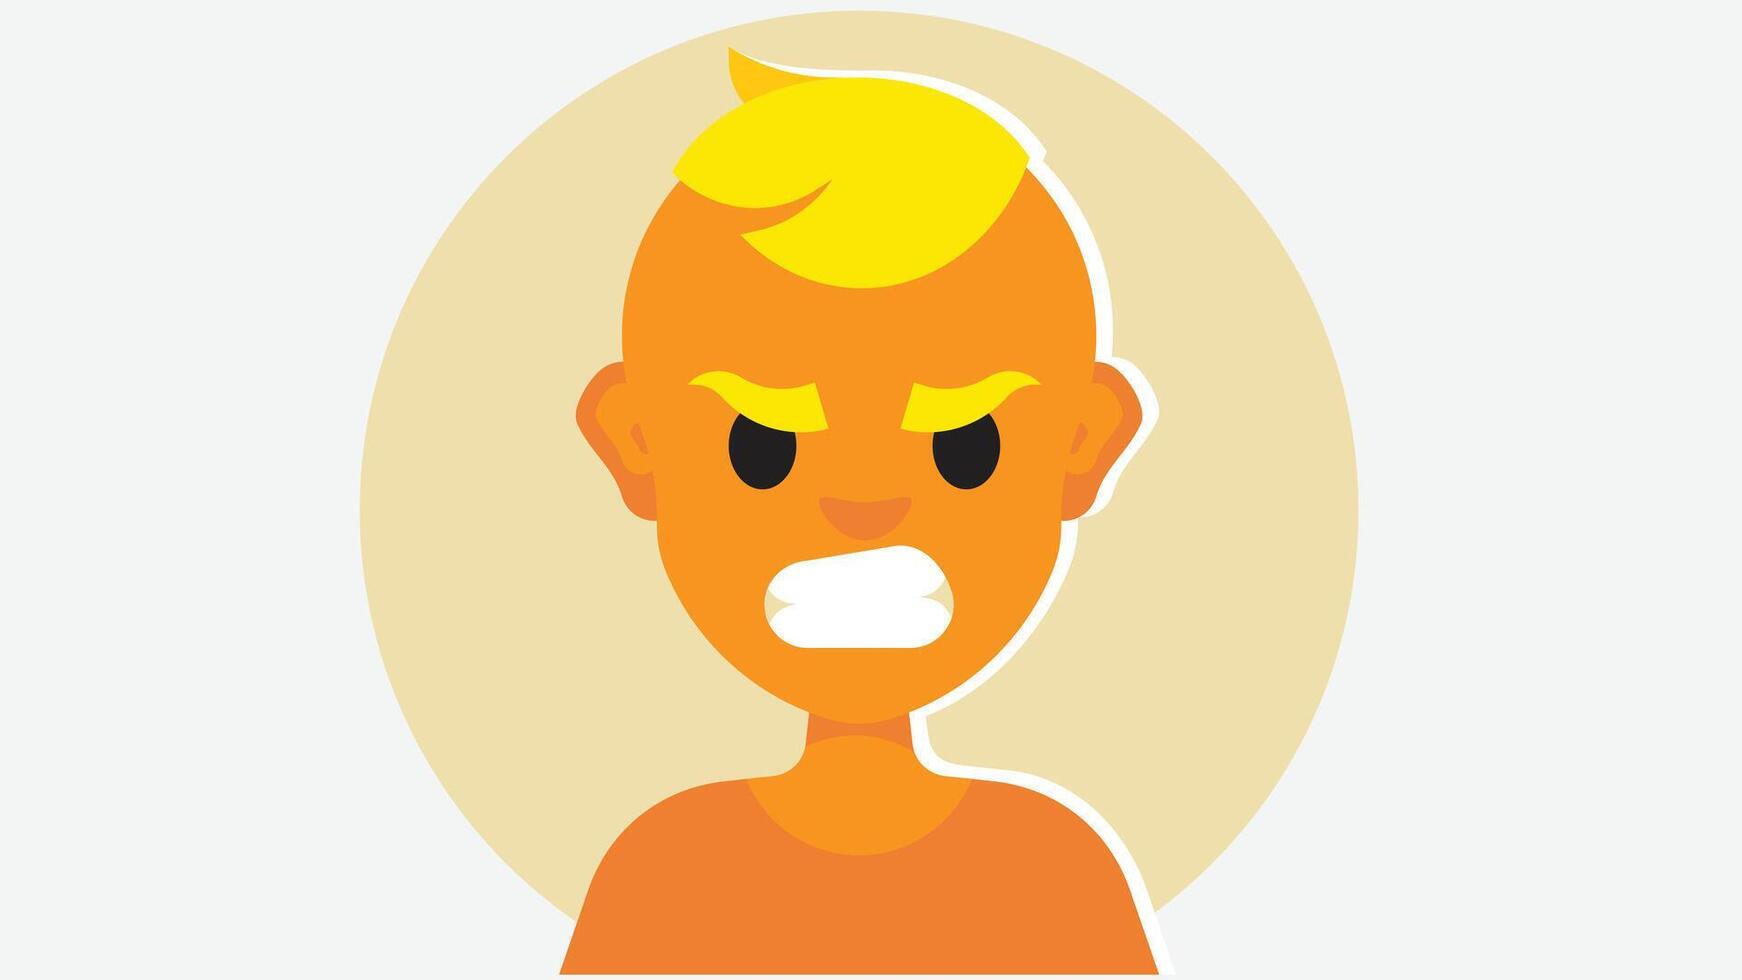 Angry child with anger face expressions vector illustration